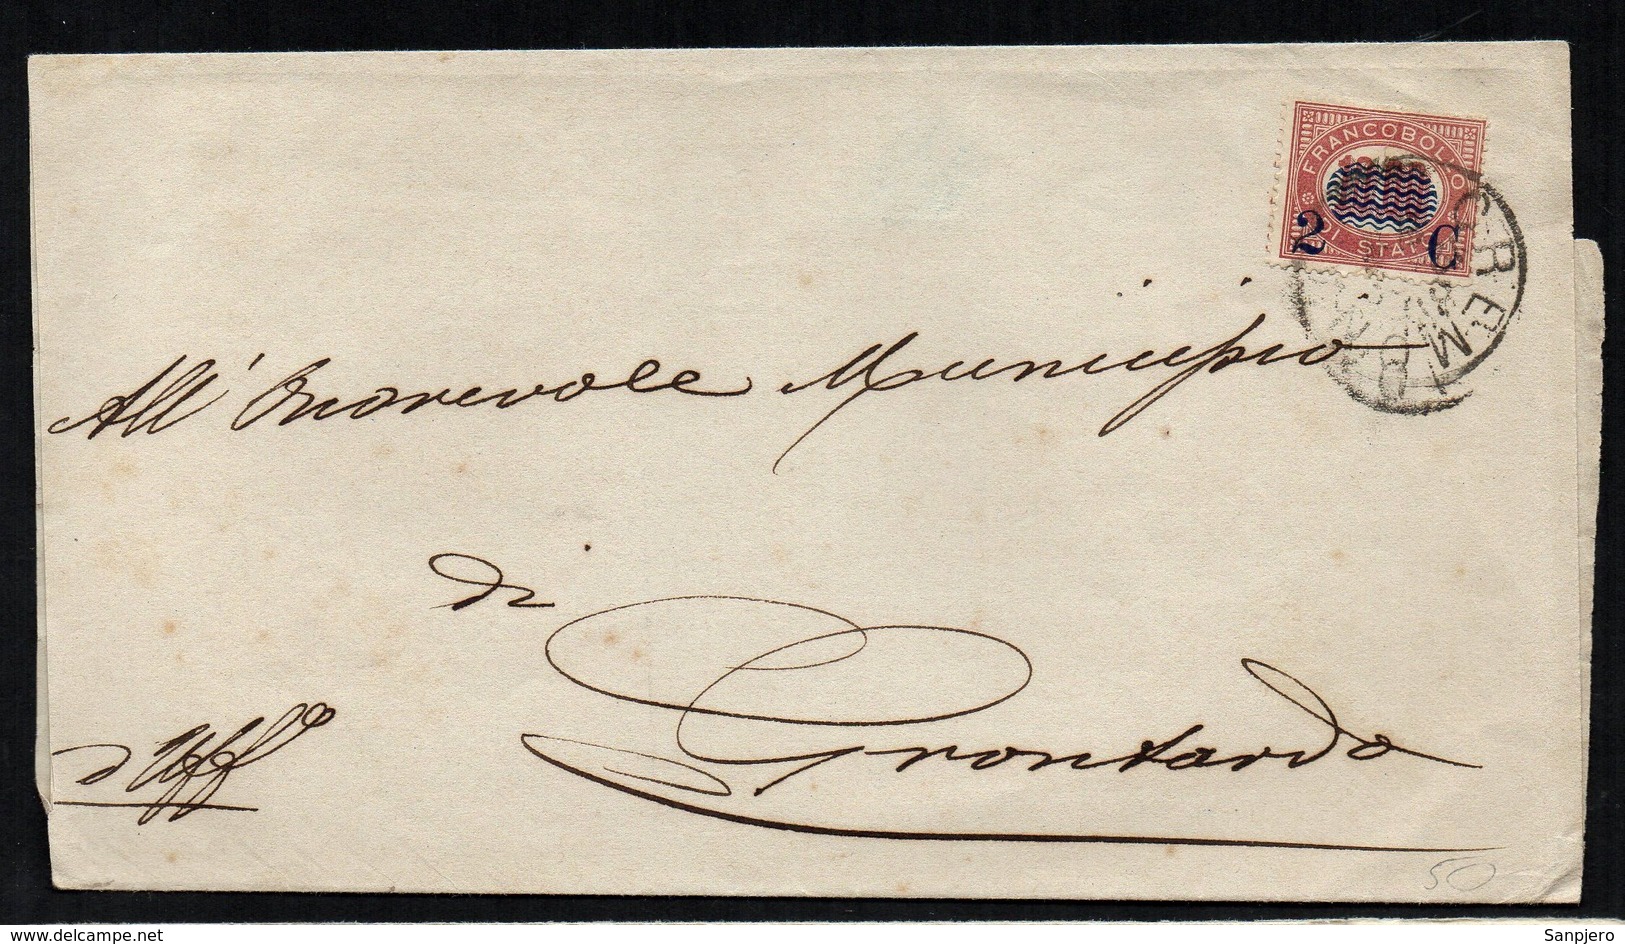 ITALY CREMONA COVER 1878. OFFICIAL STAMP (DIENSTMARKE) MiNr. 36 (2C OVER 10.00) - Officials